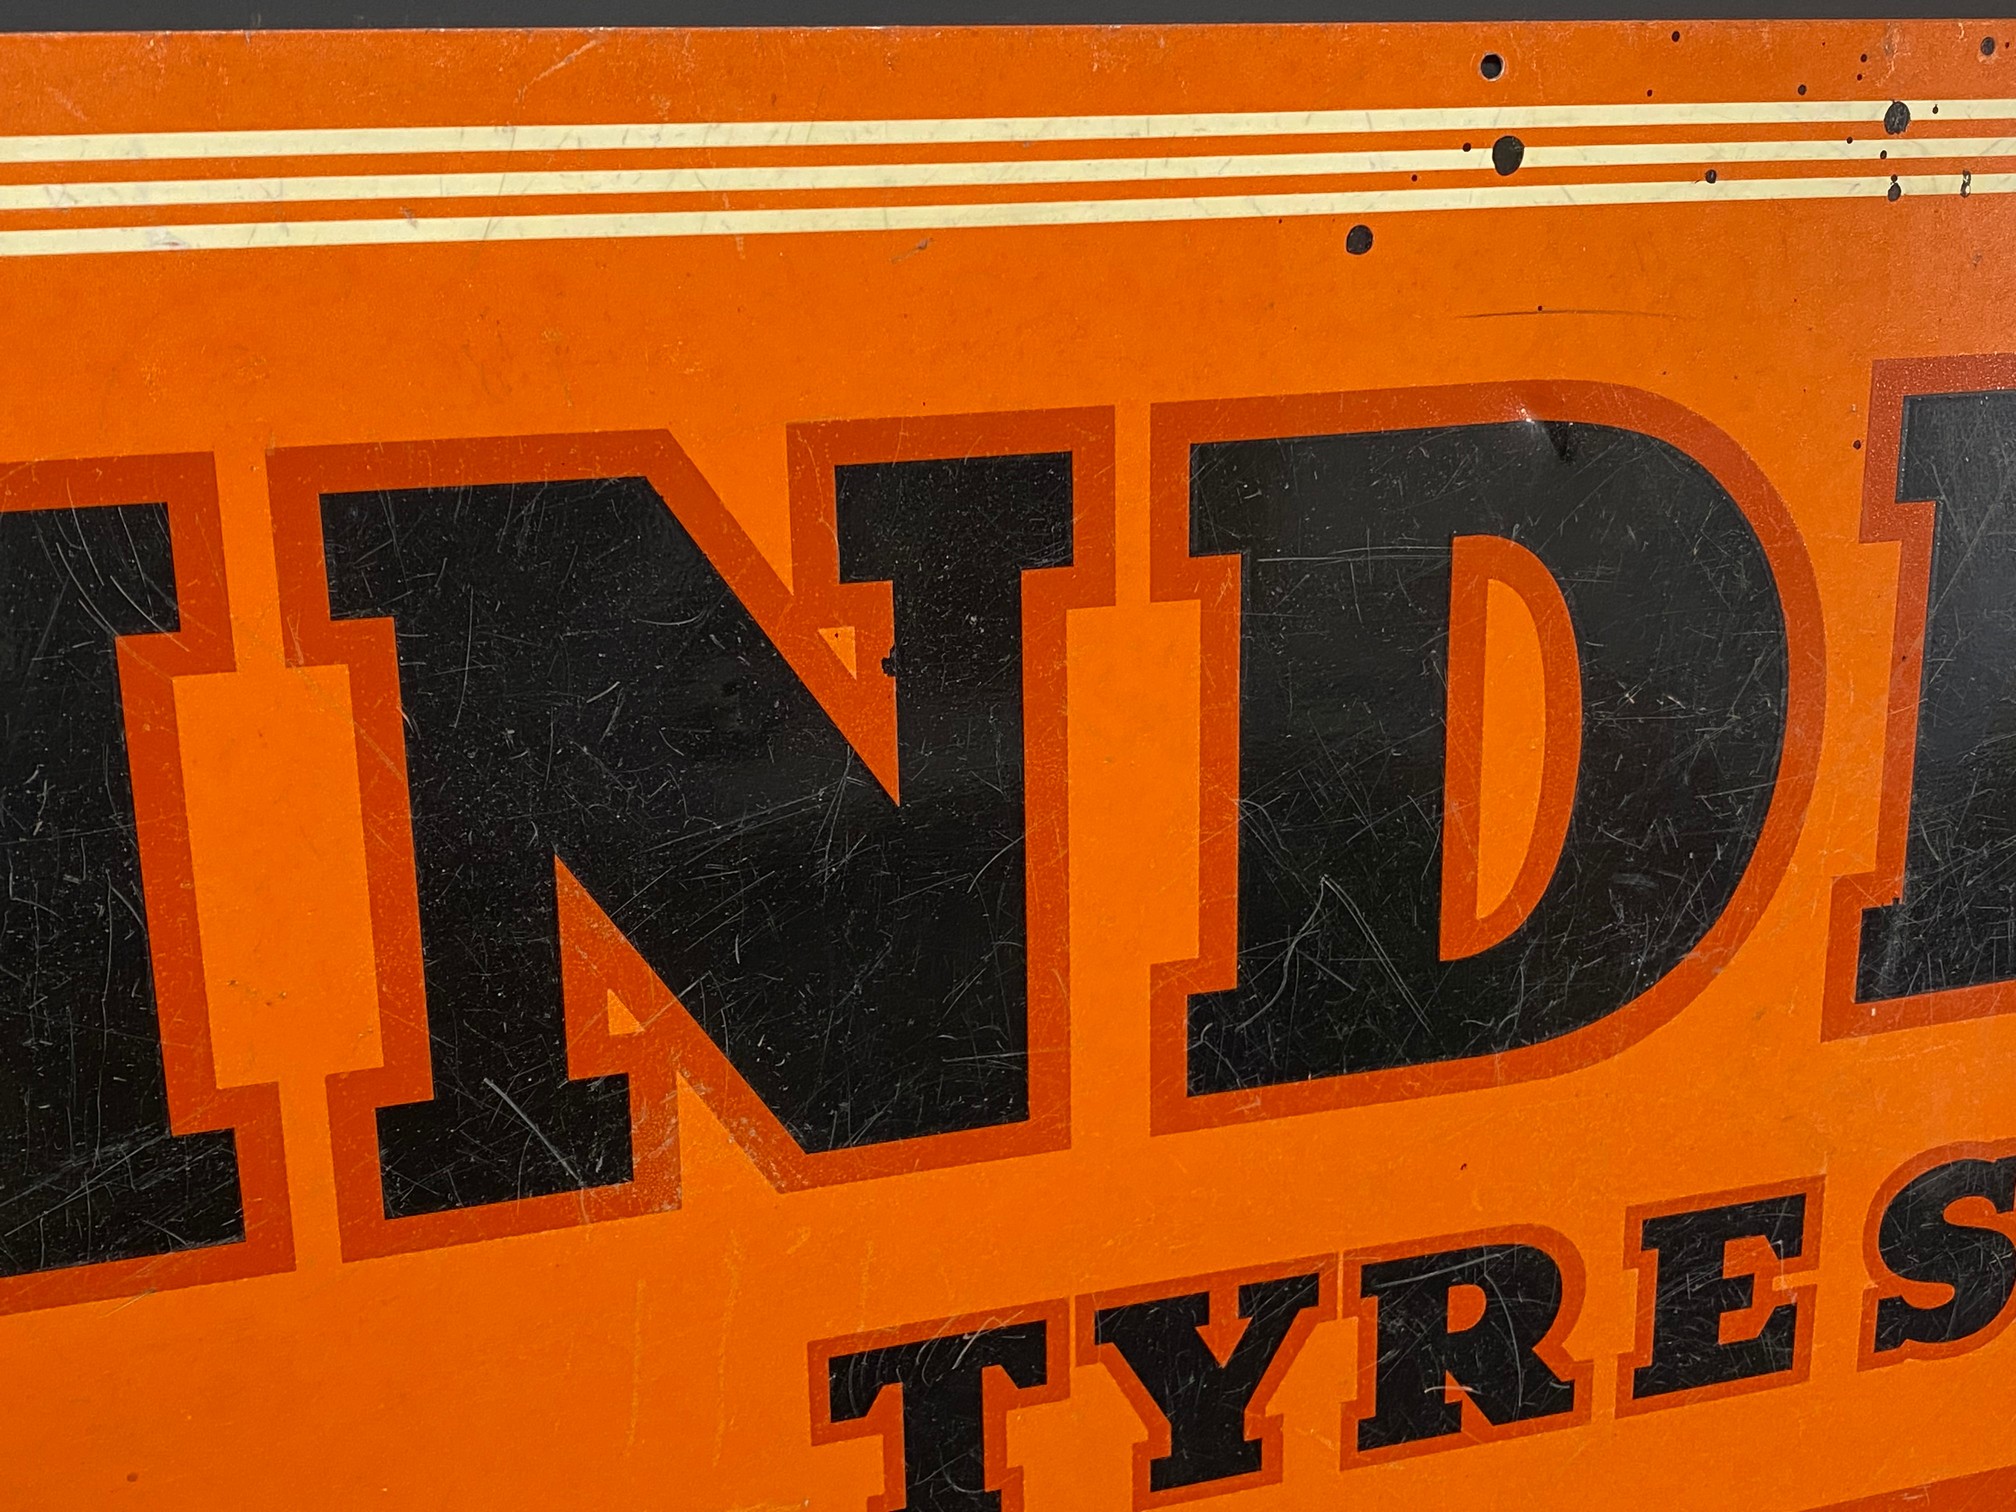 An India Tyres rectangular aluminium advertising sign by Franco, 36 x 18". - Image 3 of 6